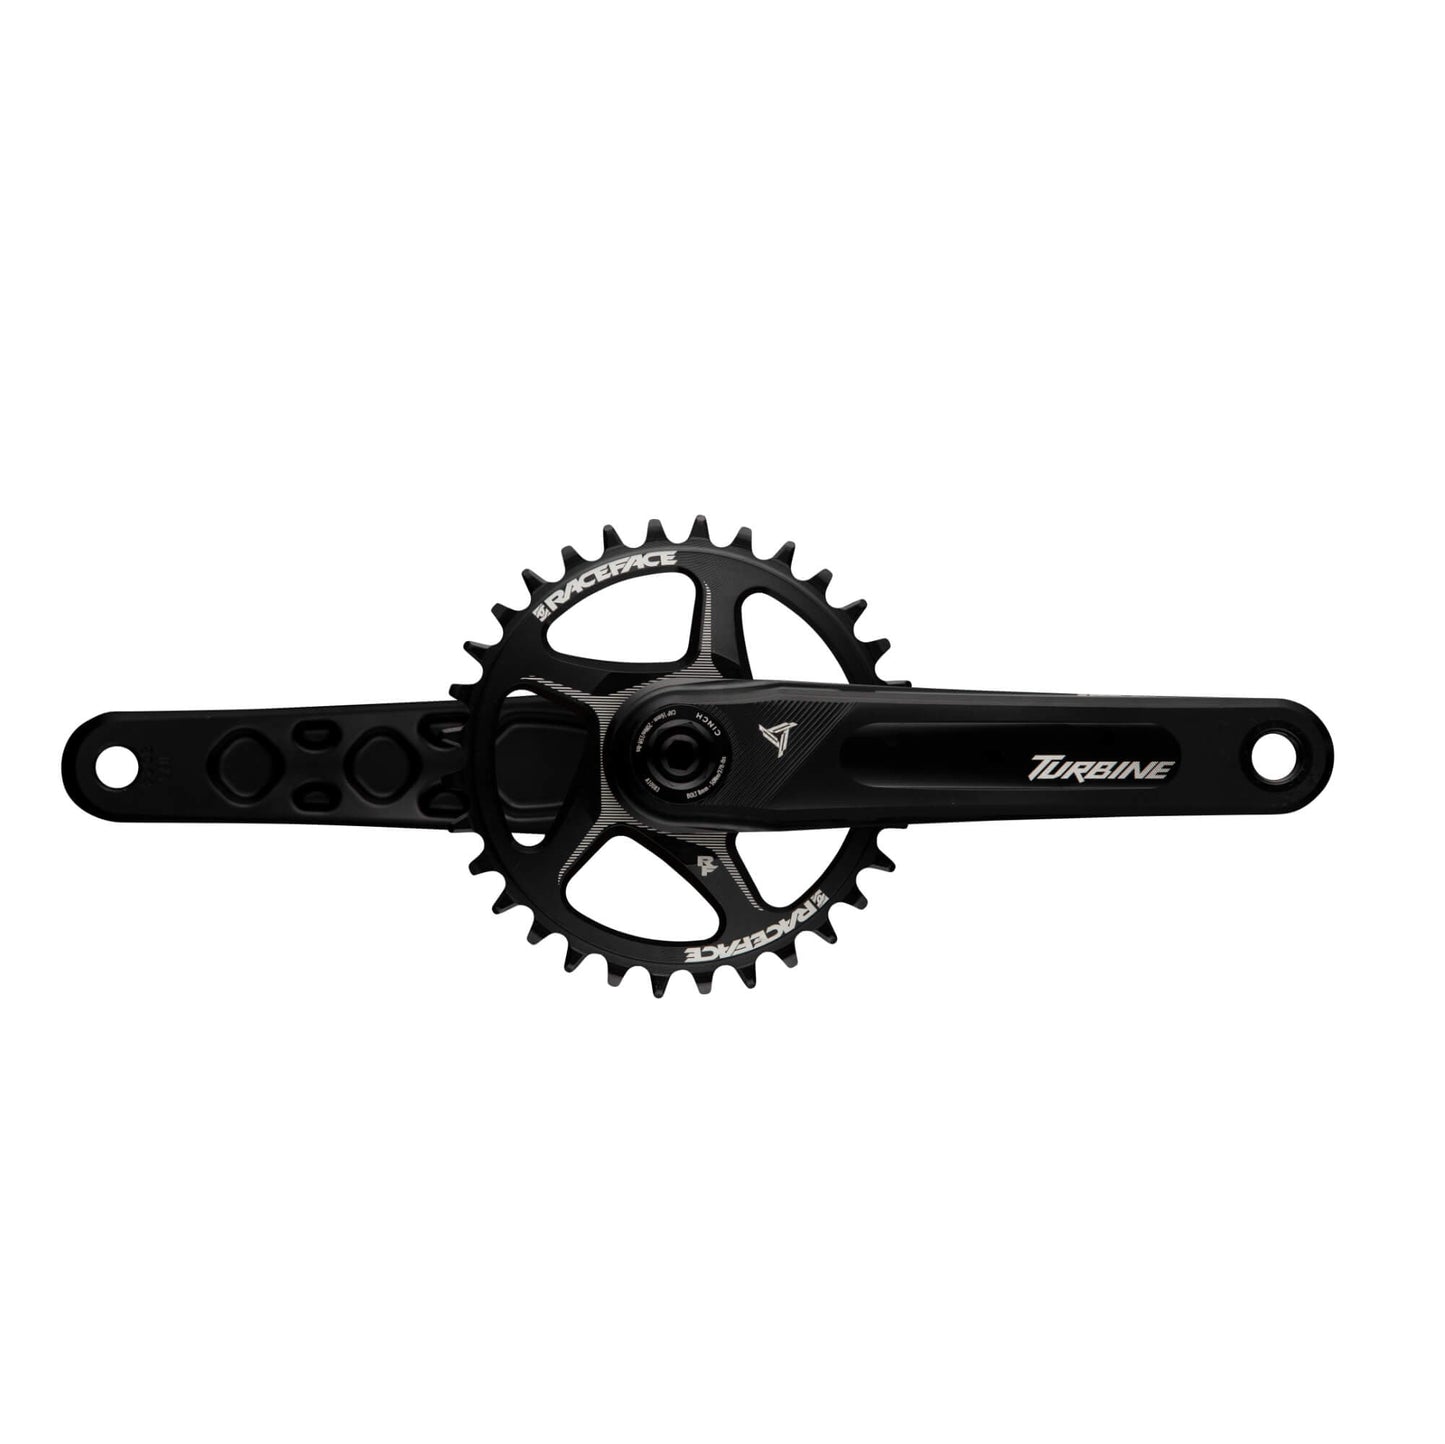 Race Face Turbine Cranks (Arms Only) 143mm Spindle Size - 170mm Length (55.5mm chainline)